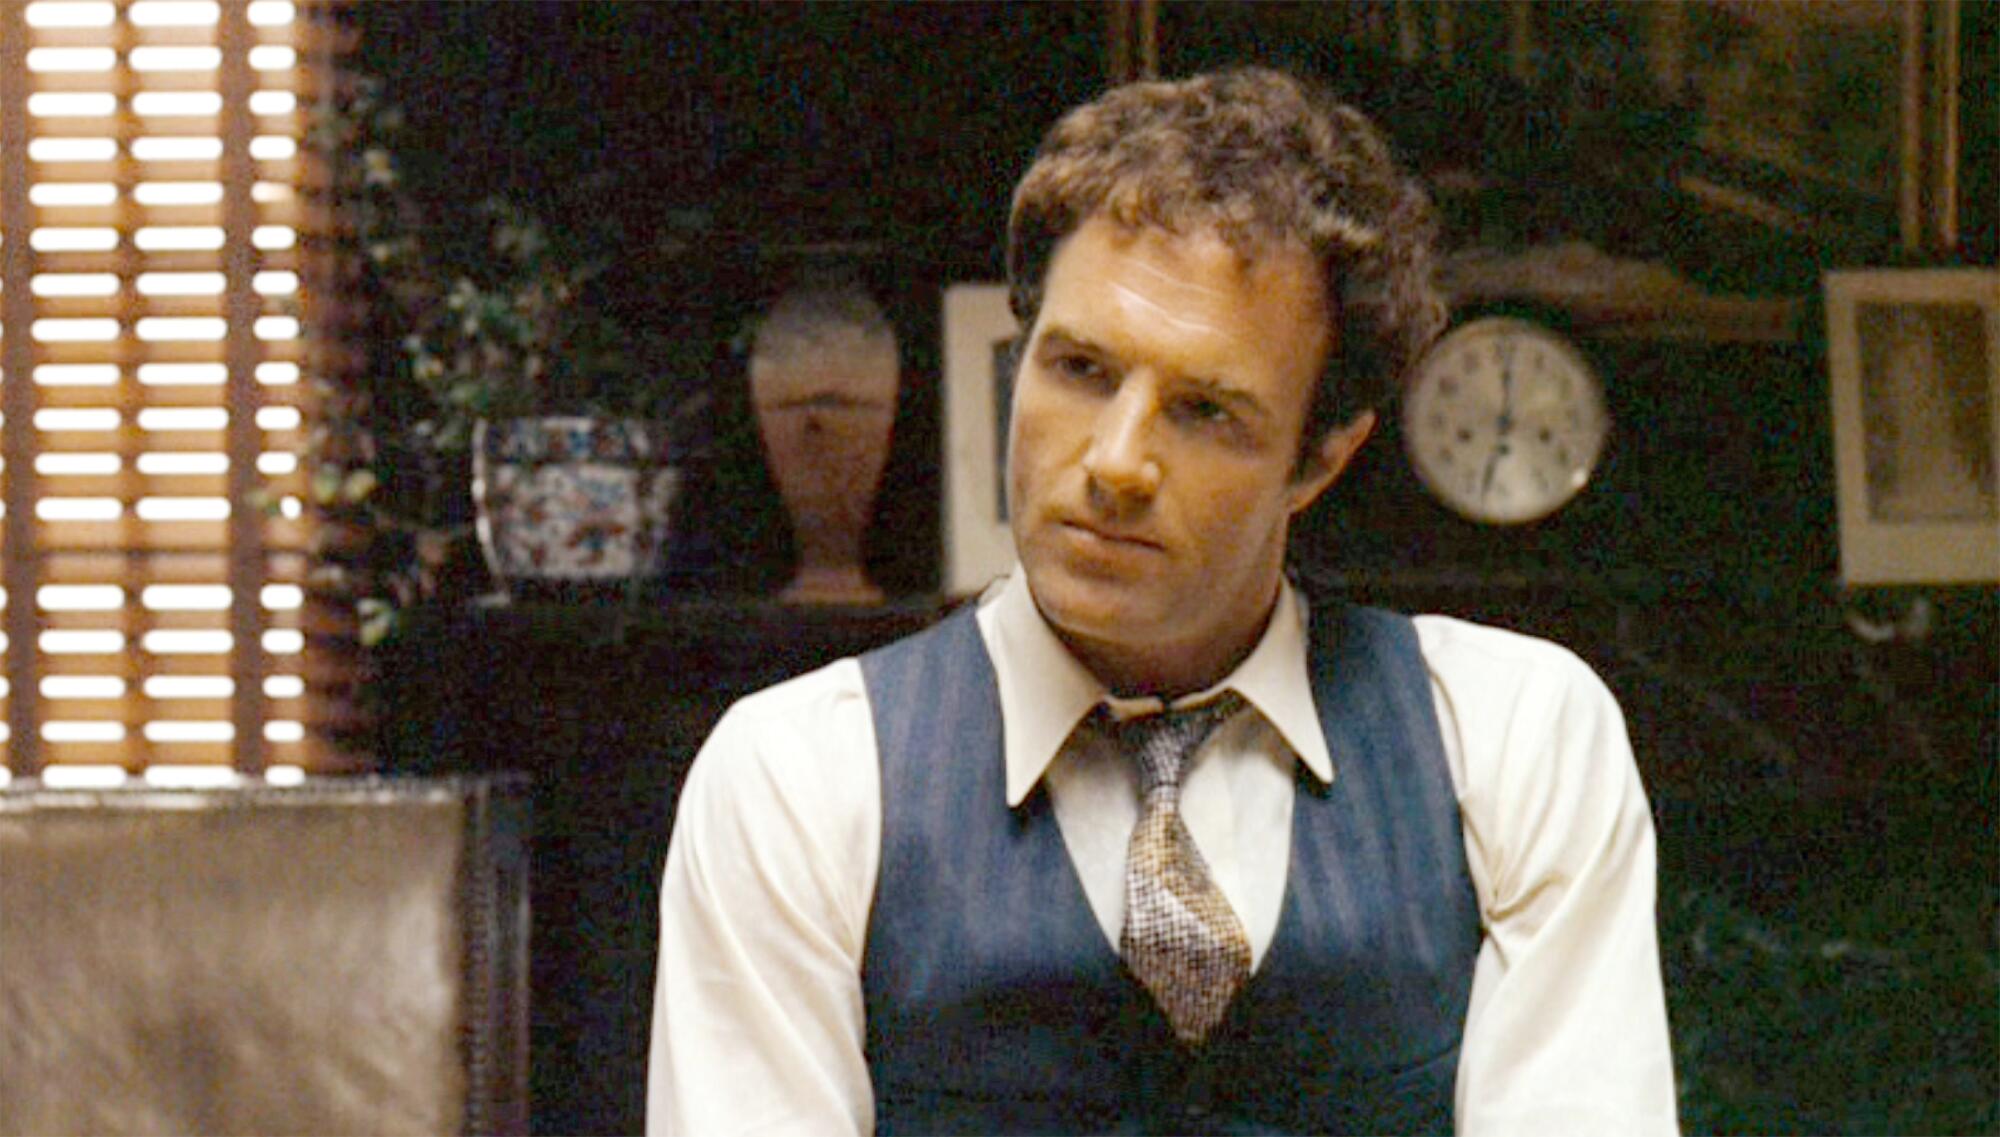 James Caan as Santino "Sonny" Corleone in "The Godfather" in 1972.